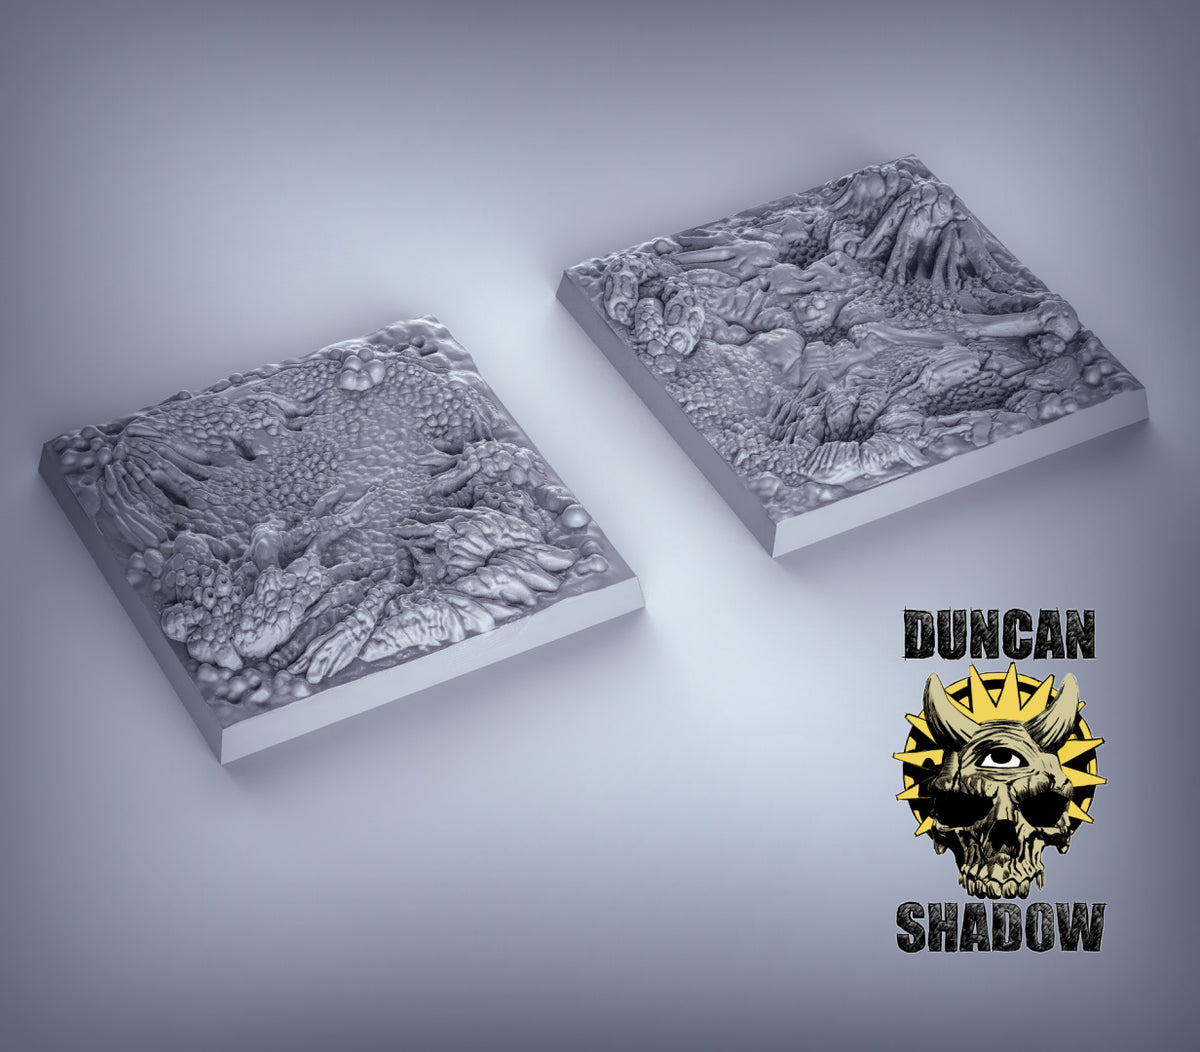 Plague Bases Square Resin Miniature for DnD | Tabletop Gaming